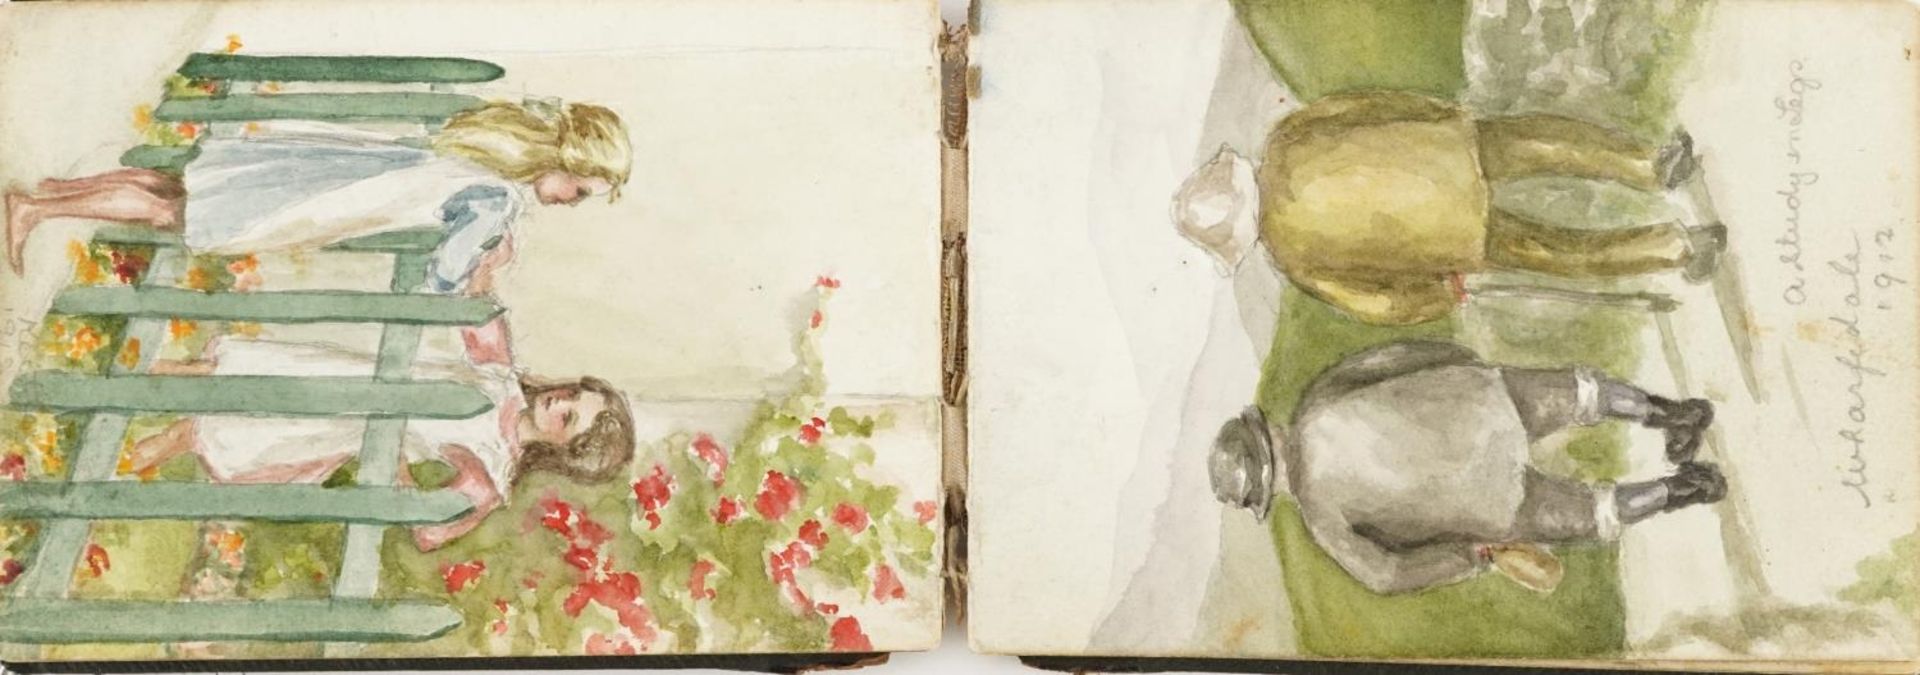 Early 20th century artist's travel sketchbook housing various watercolours and pencil sketches - Image 8 of 15